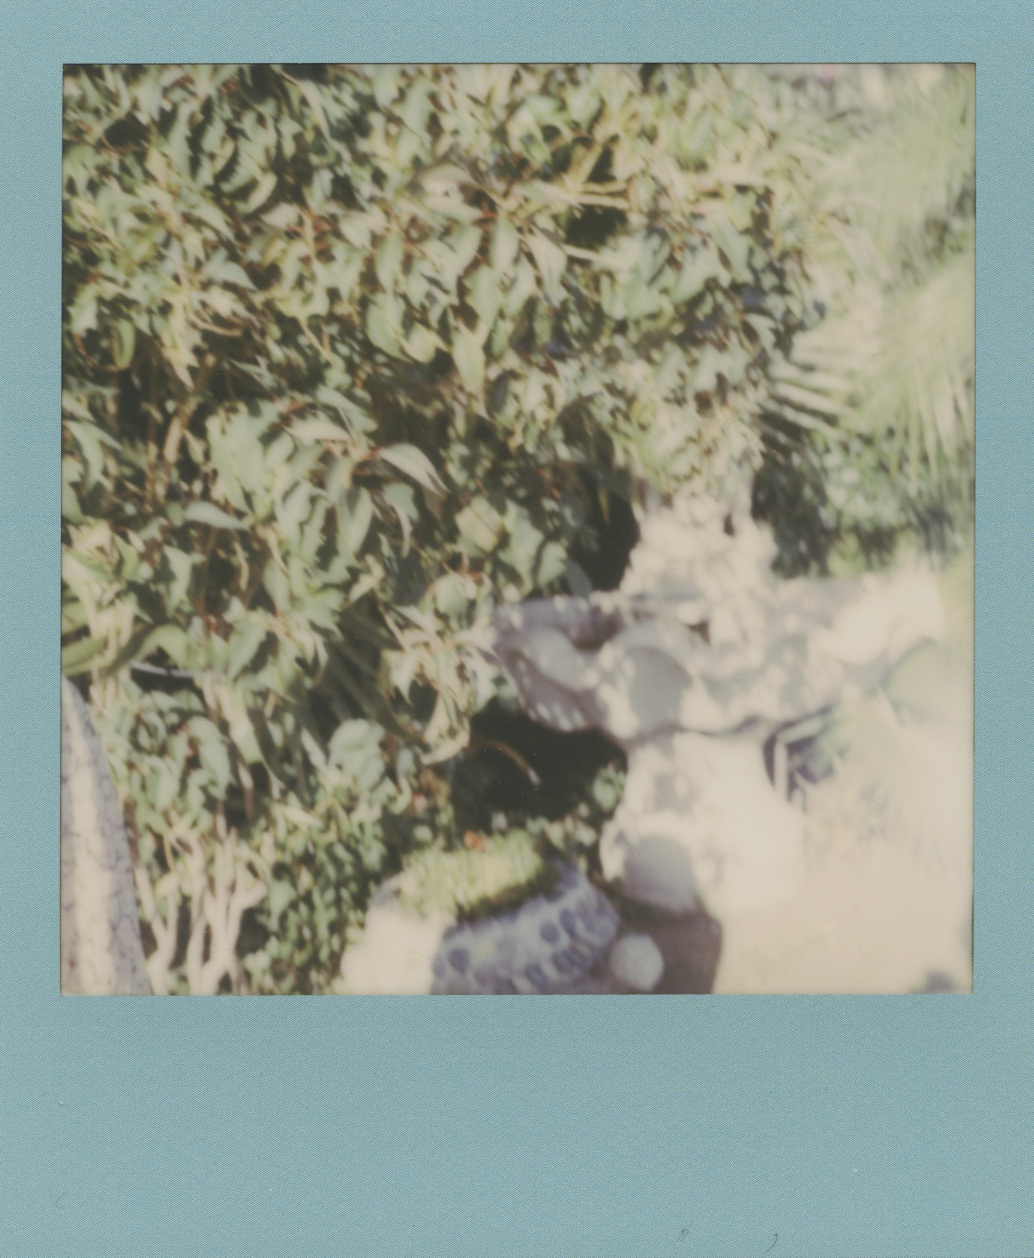 impossible_colorframe_0004.jpg